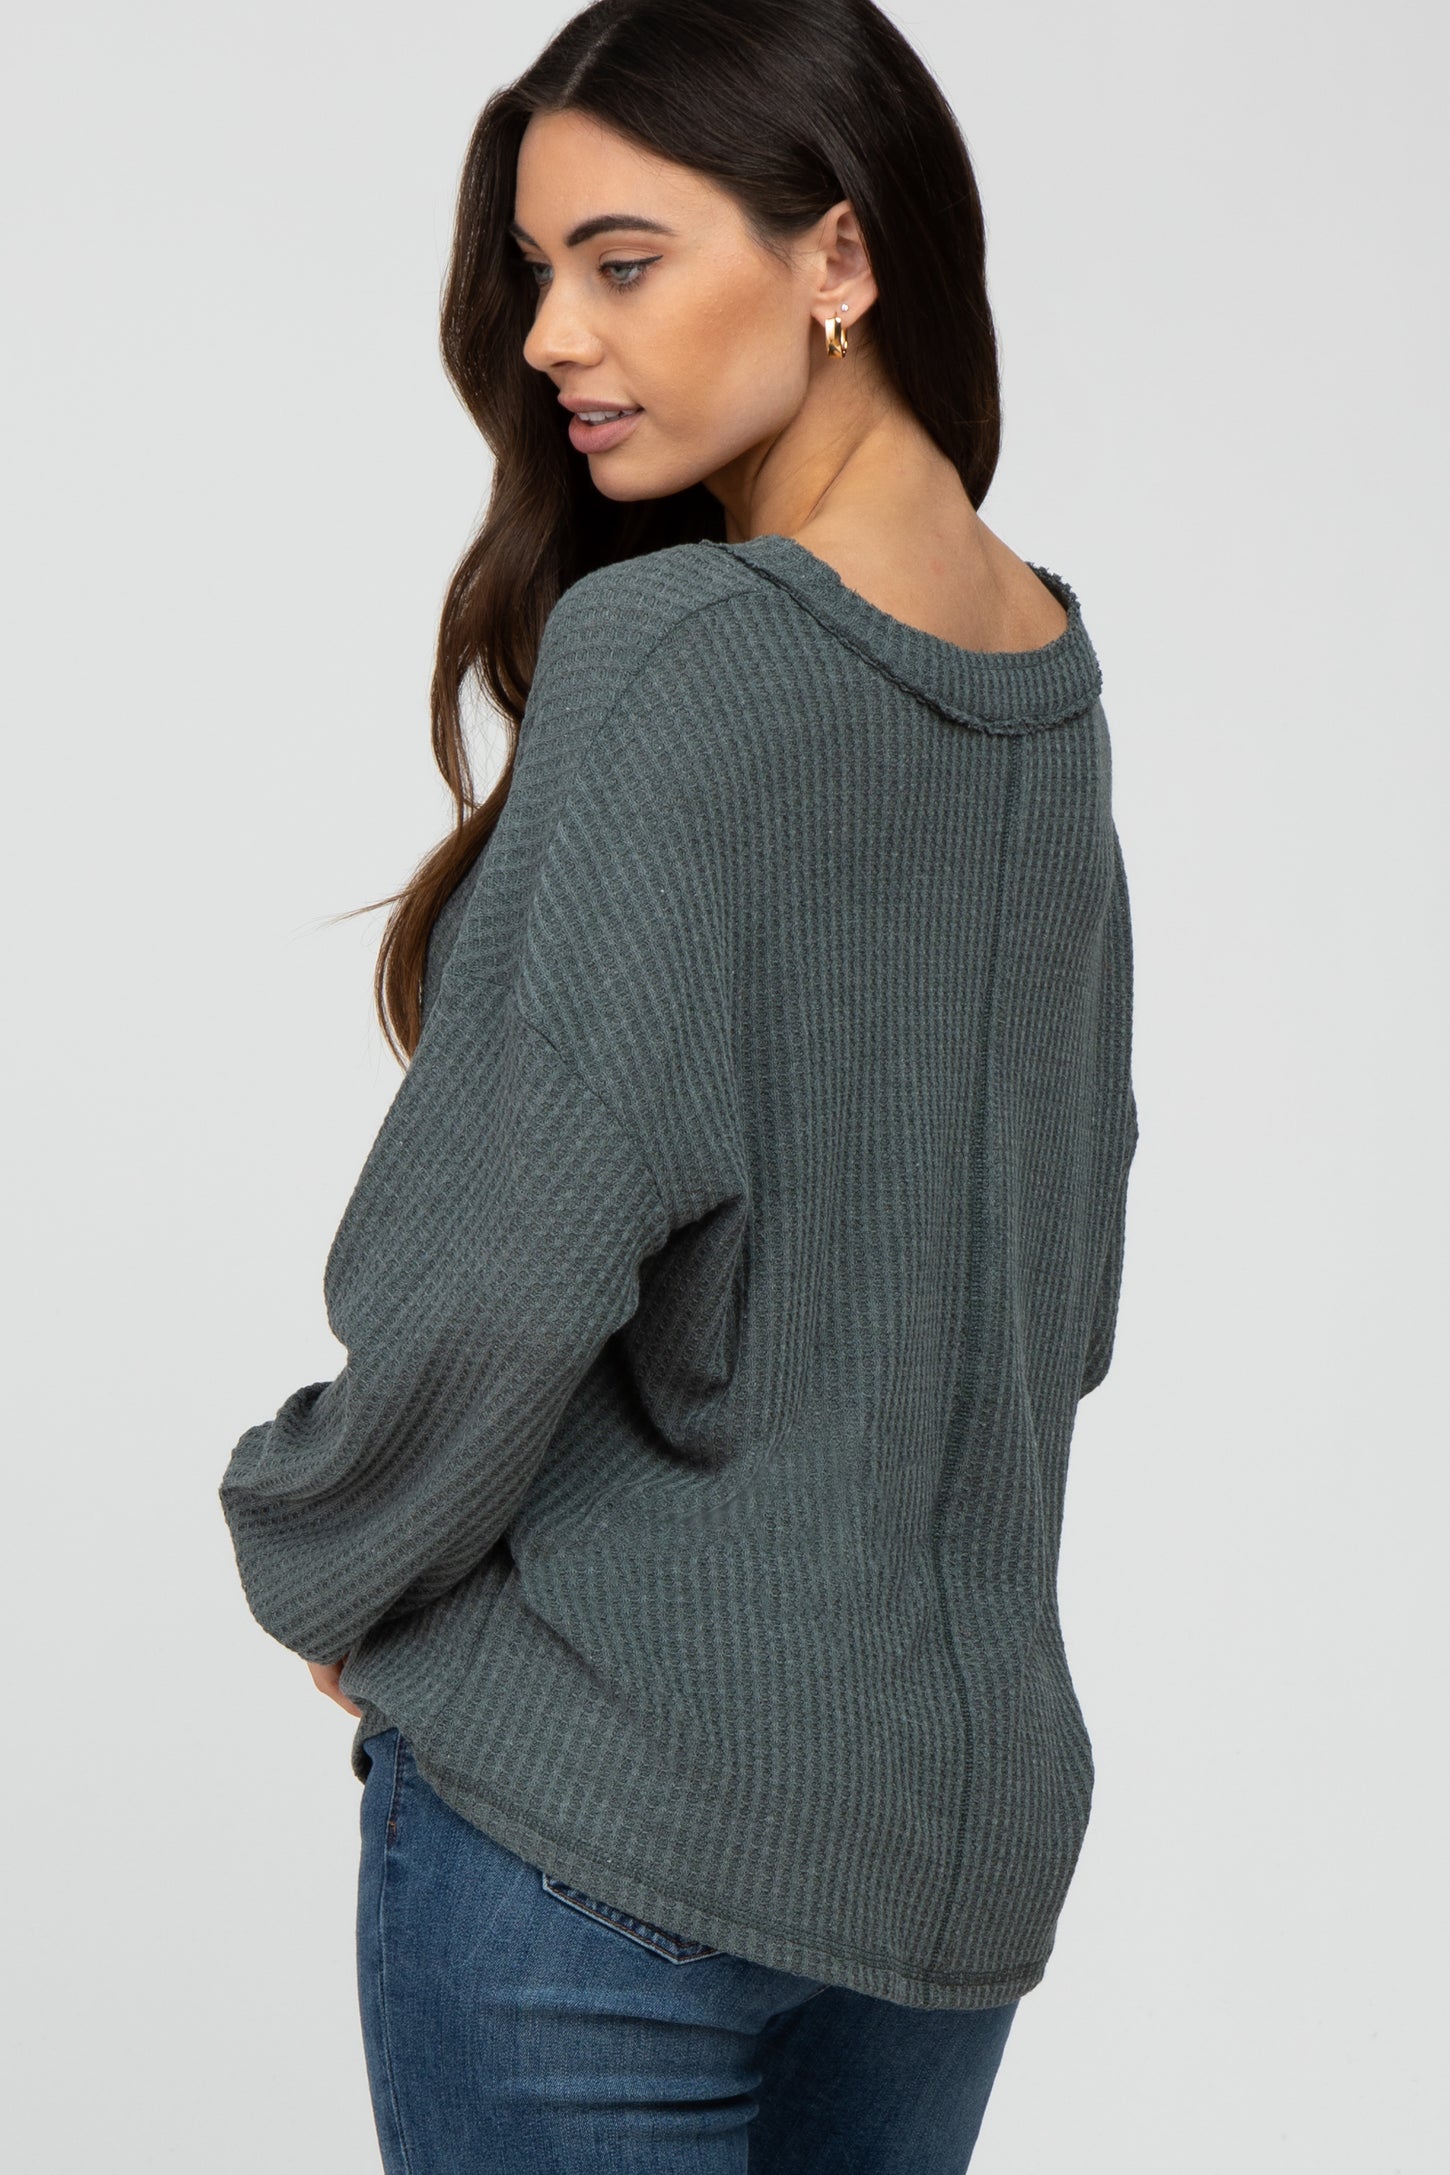 Teal Waffle Knit Button Accent Top